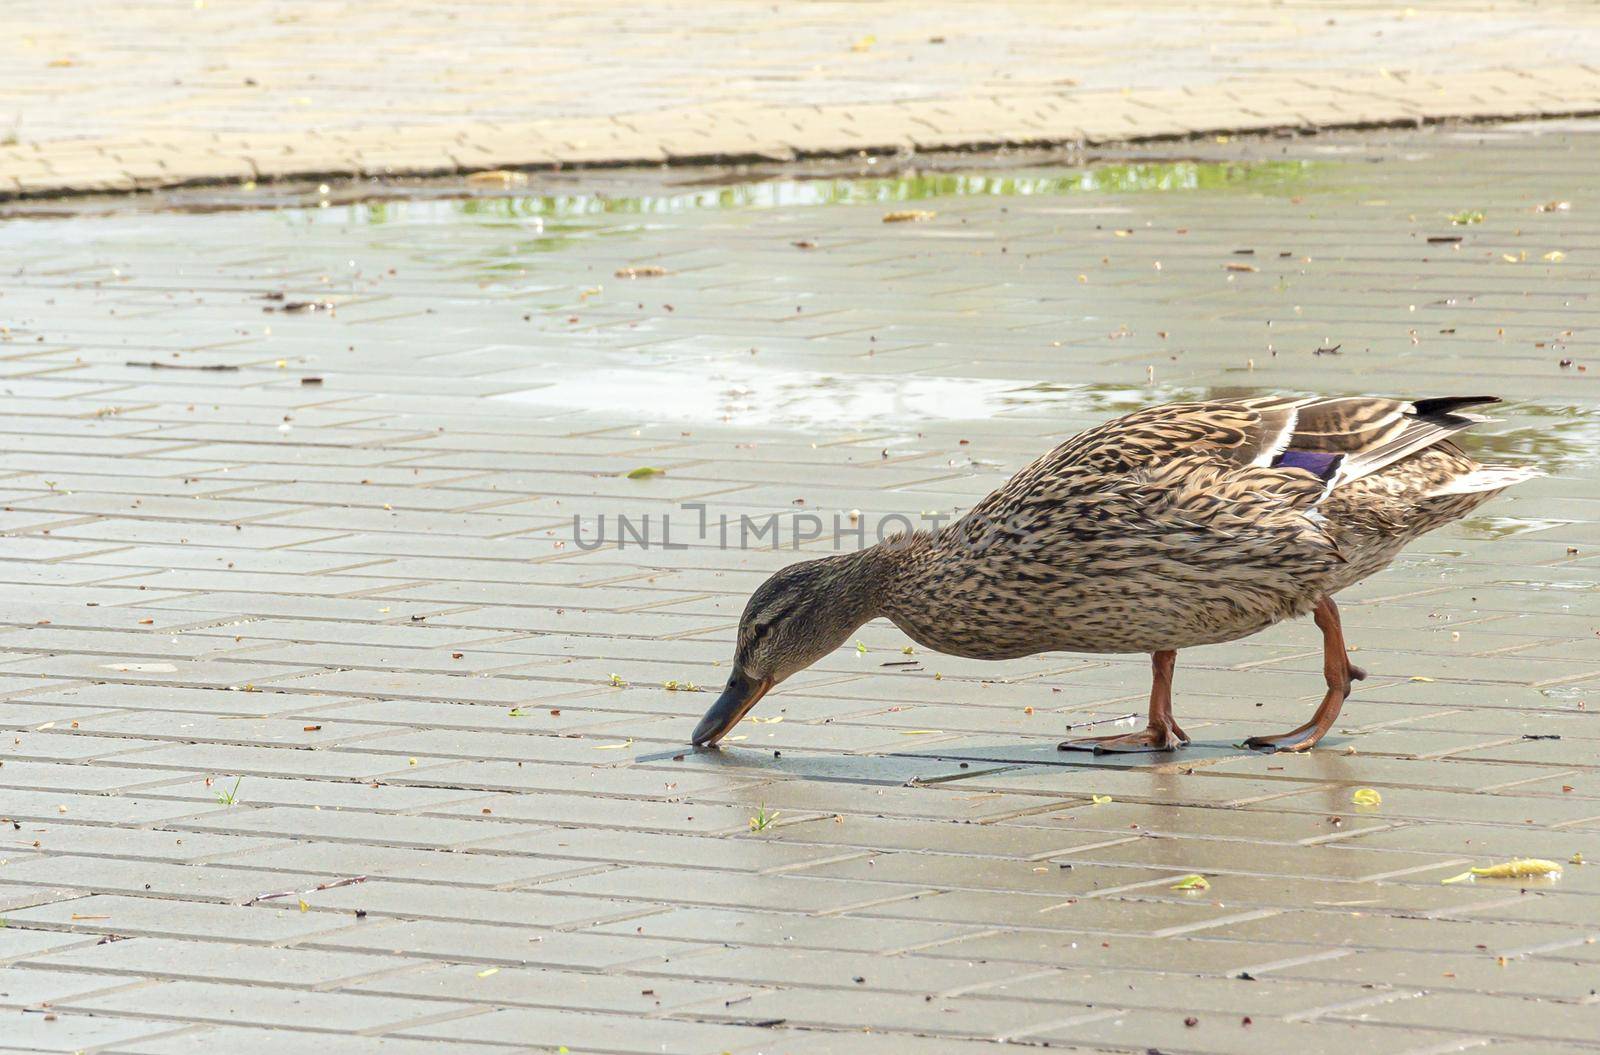 duck is feeding on the sidewalk. Close-up, blurred, background. Stock photography.